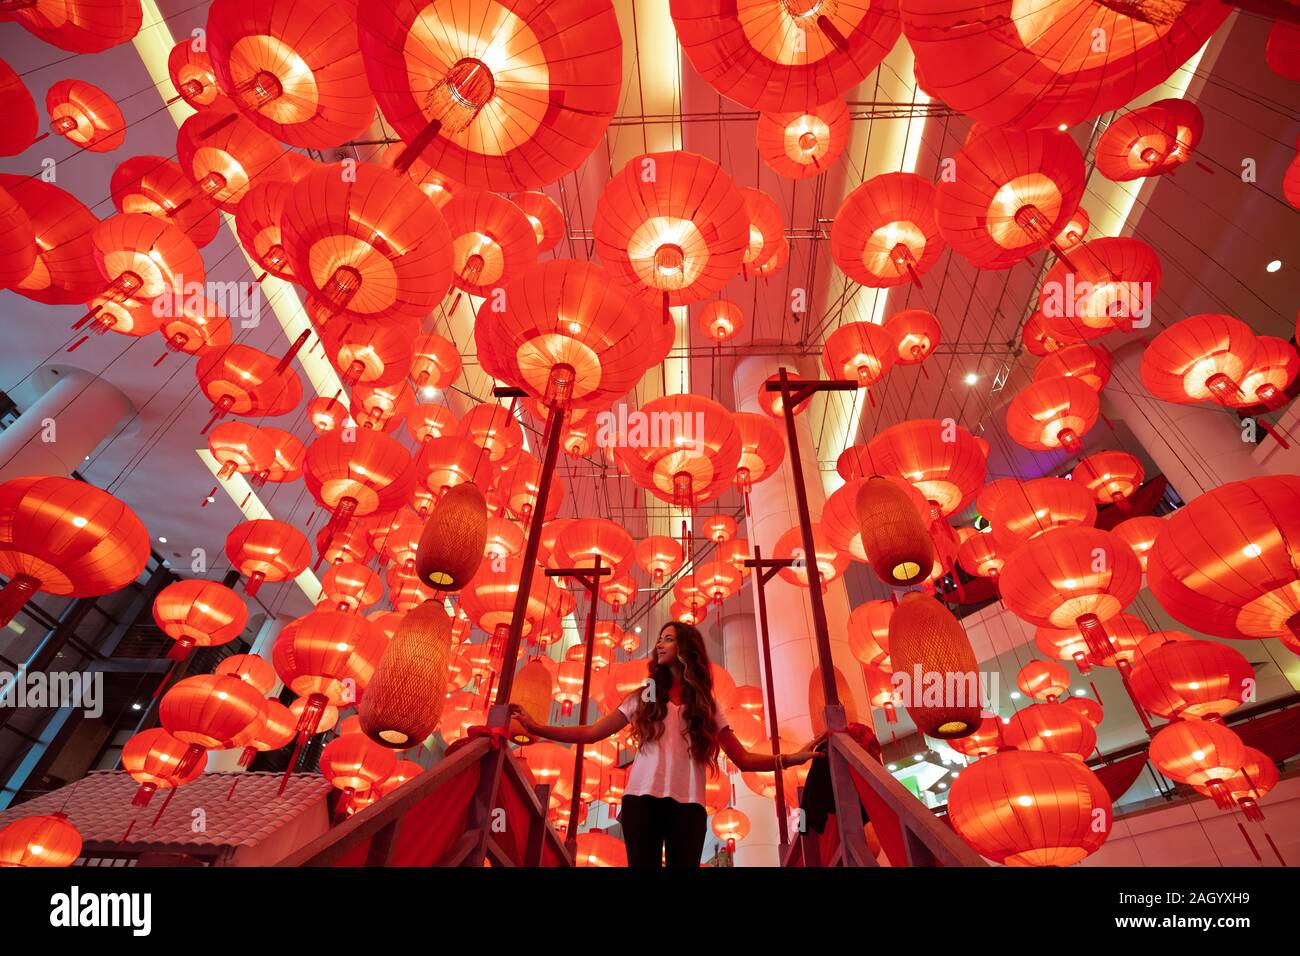 Woman walking and enjoying traditional red lanterns decorated for Chinese new year Chunjie. Asian culture inspiration. Trend lava color. Stock Photo